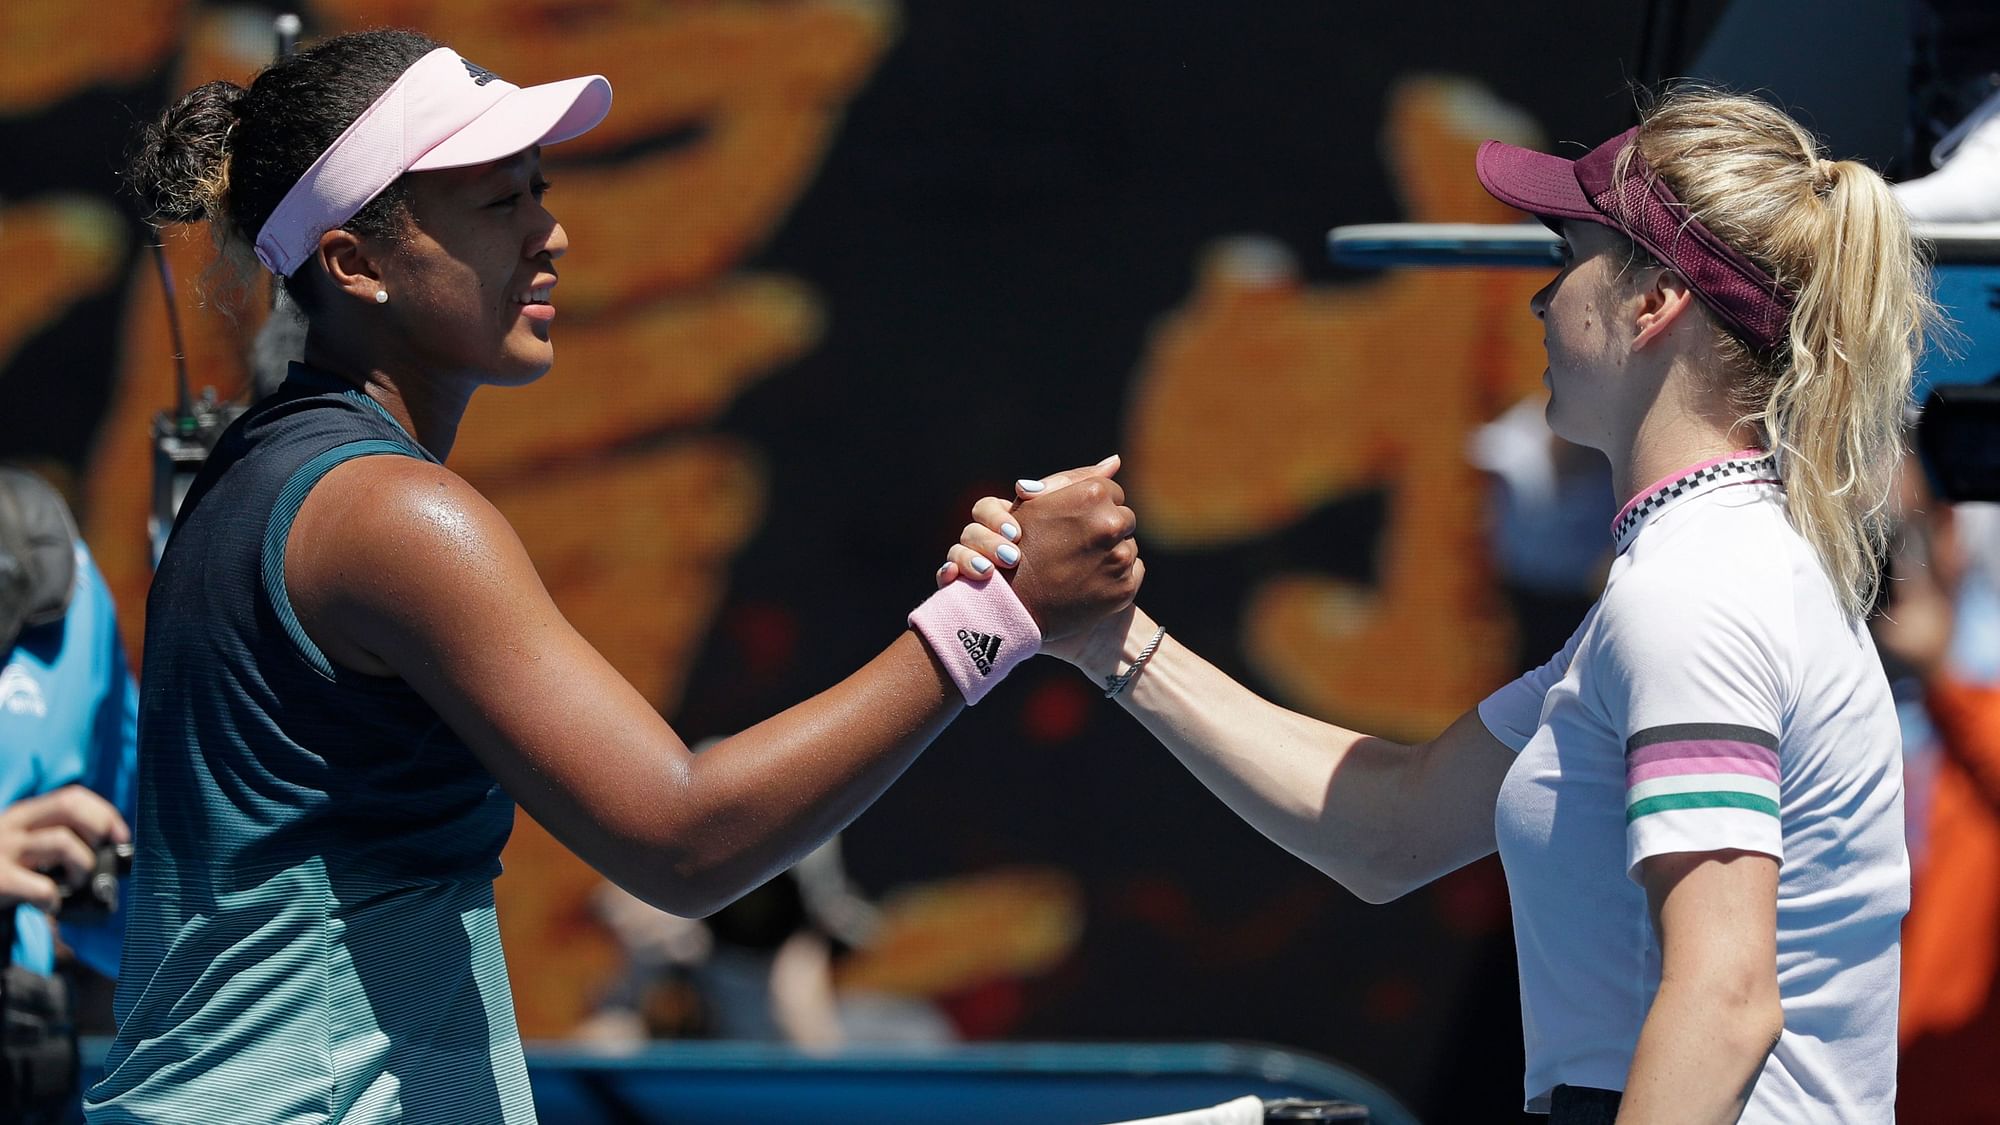 Naomi Osaka and Elina Svitolina meet at the net after the Japanese fourth seed won their quarter-final clash at the Australian Open.